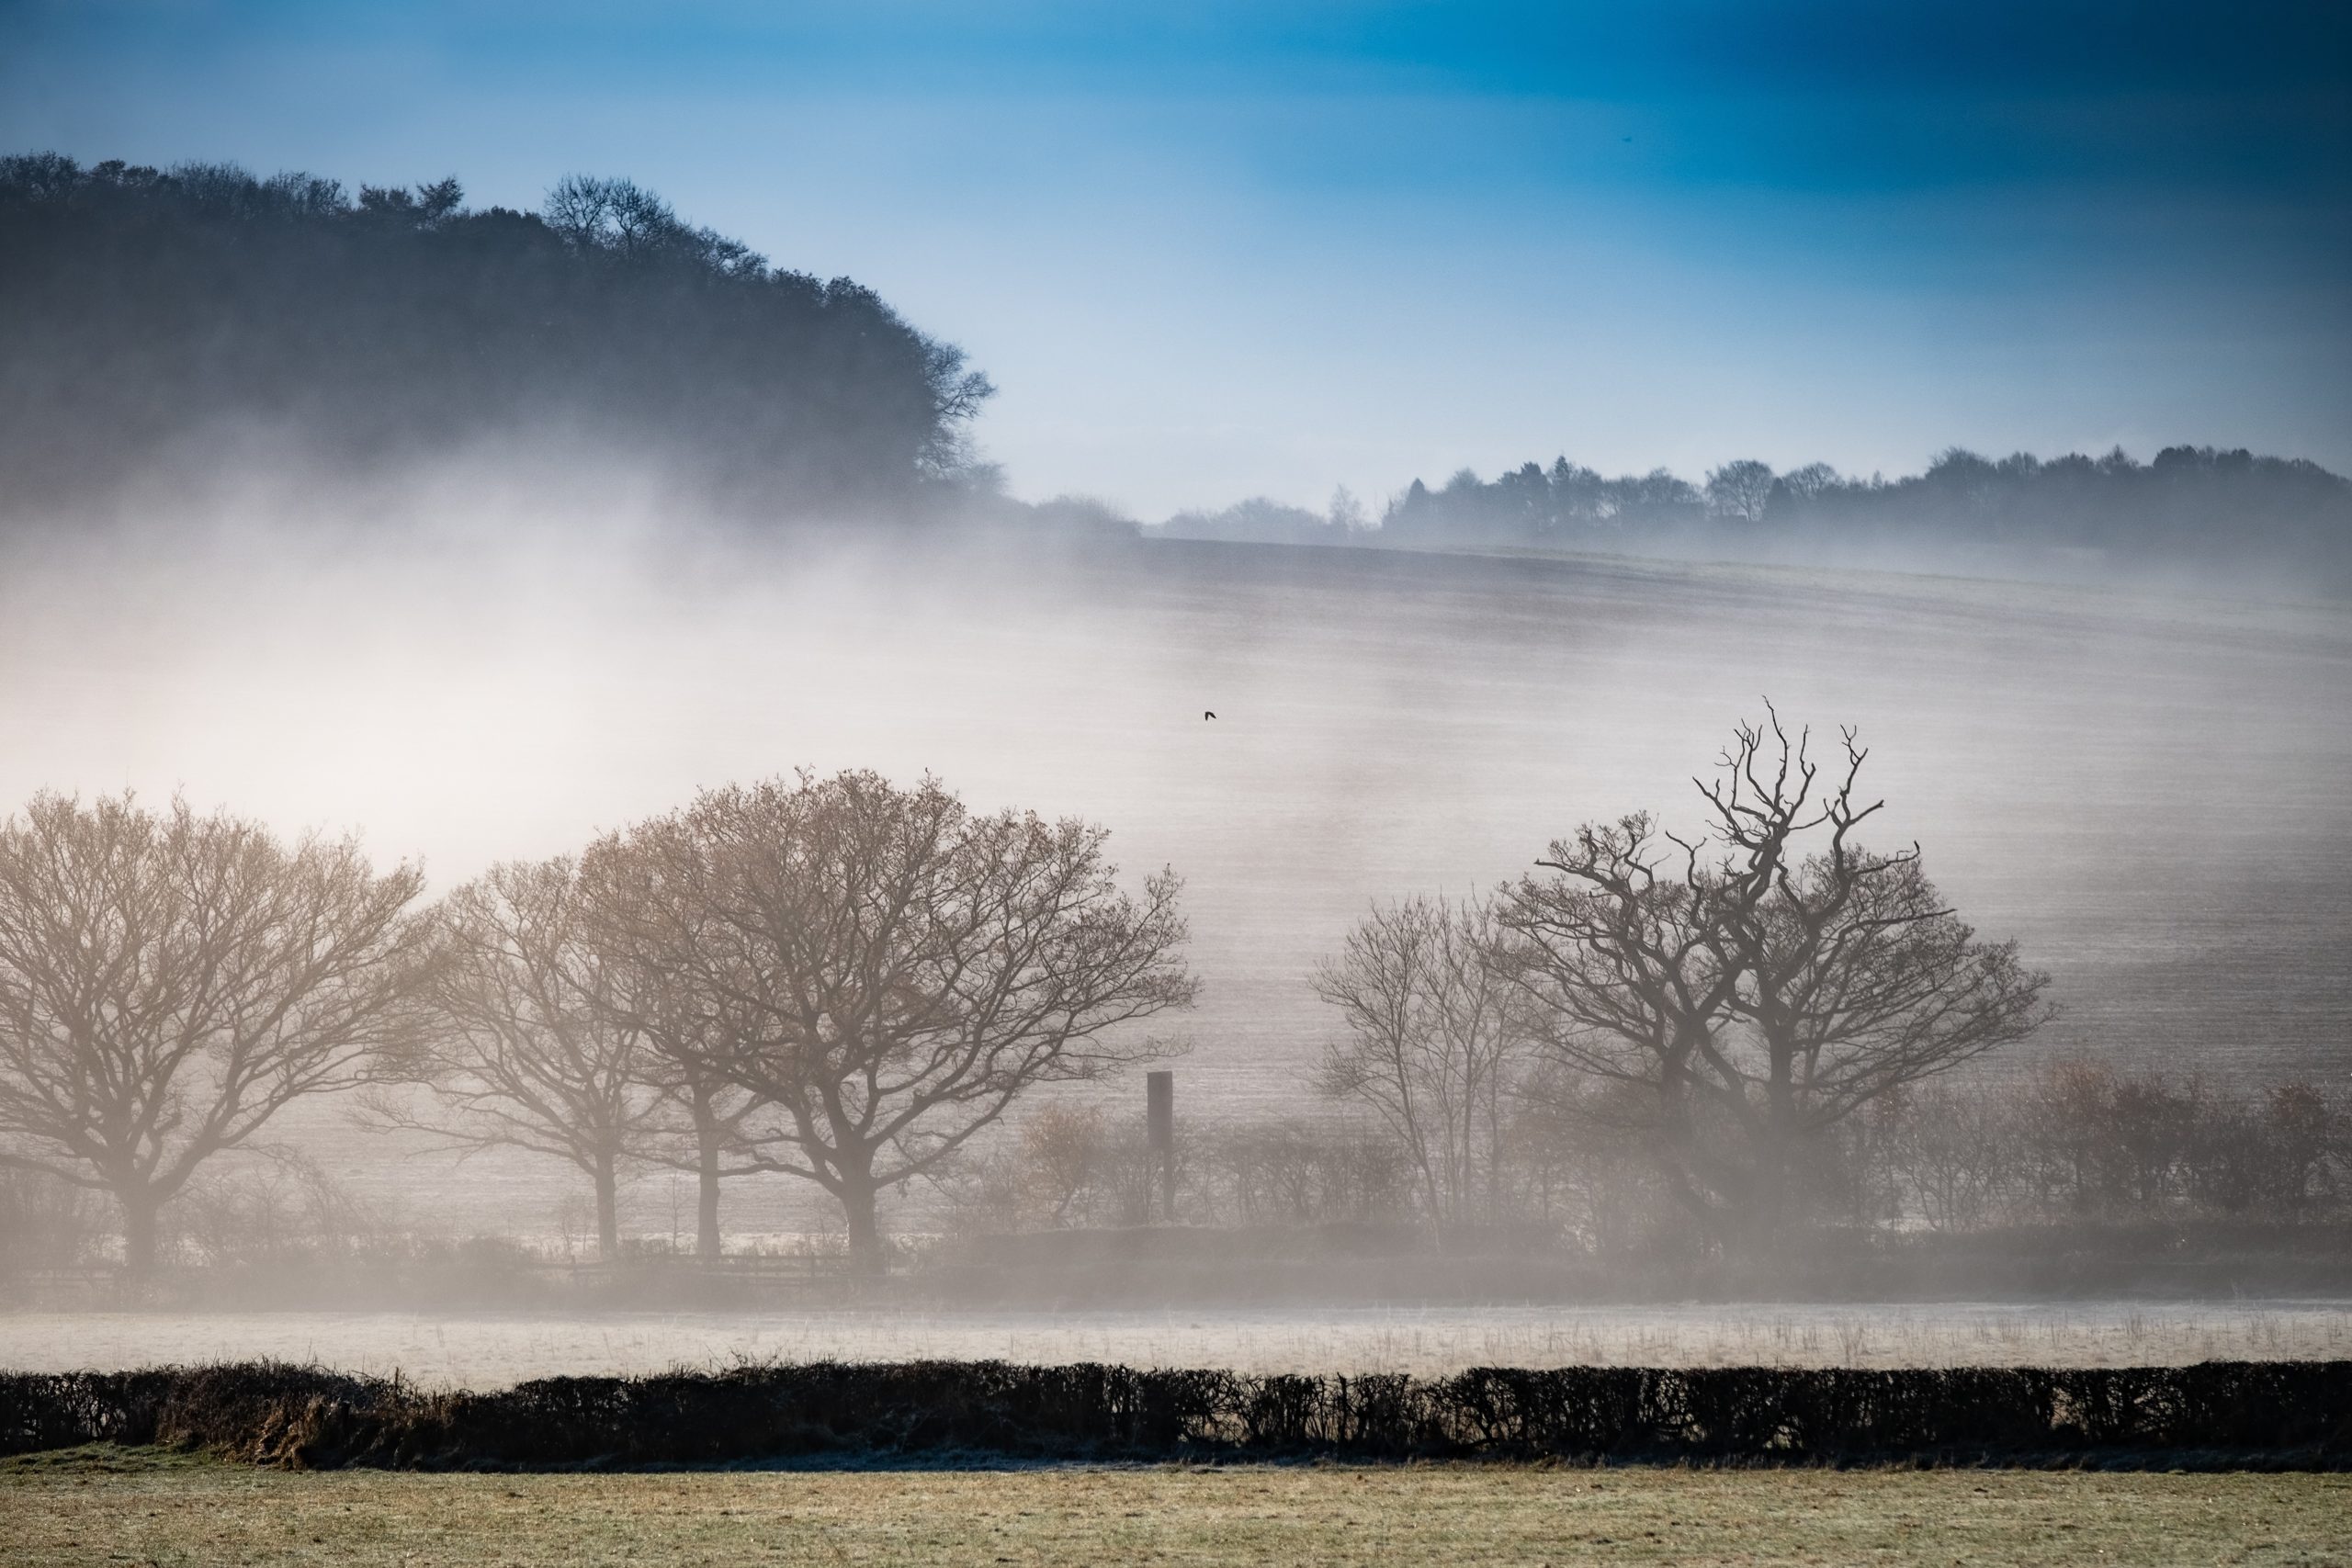 Atmospheric outdoor rural scene showing mist hanging over a valley with fields and trees